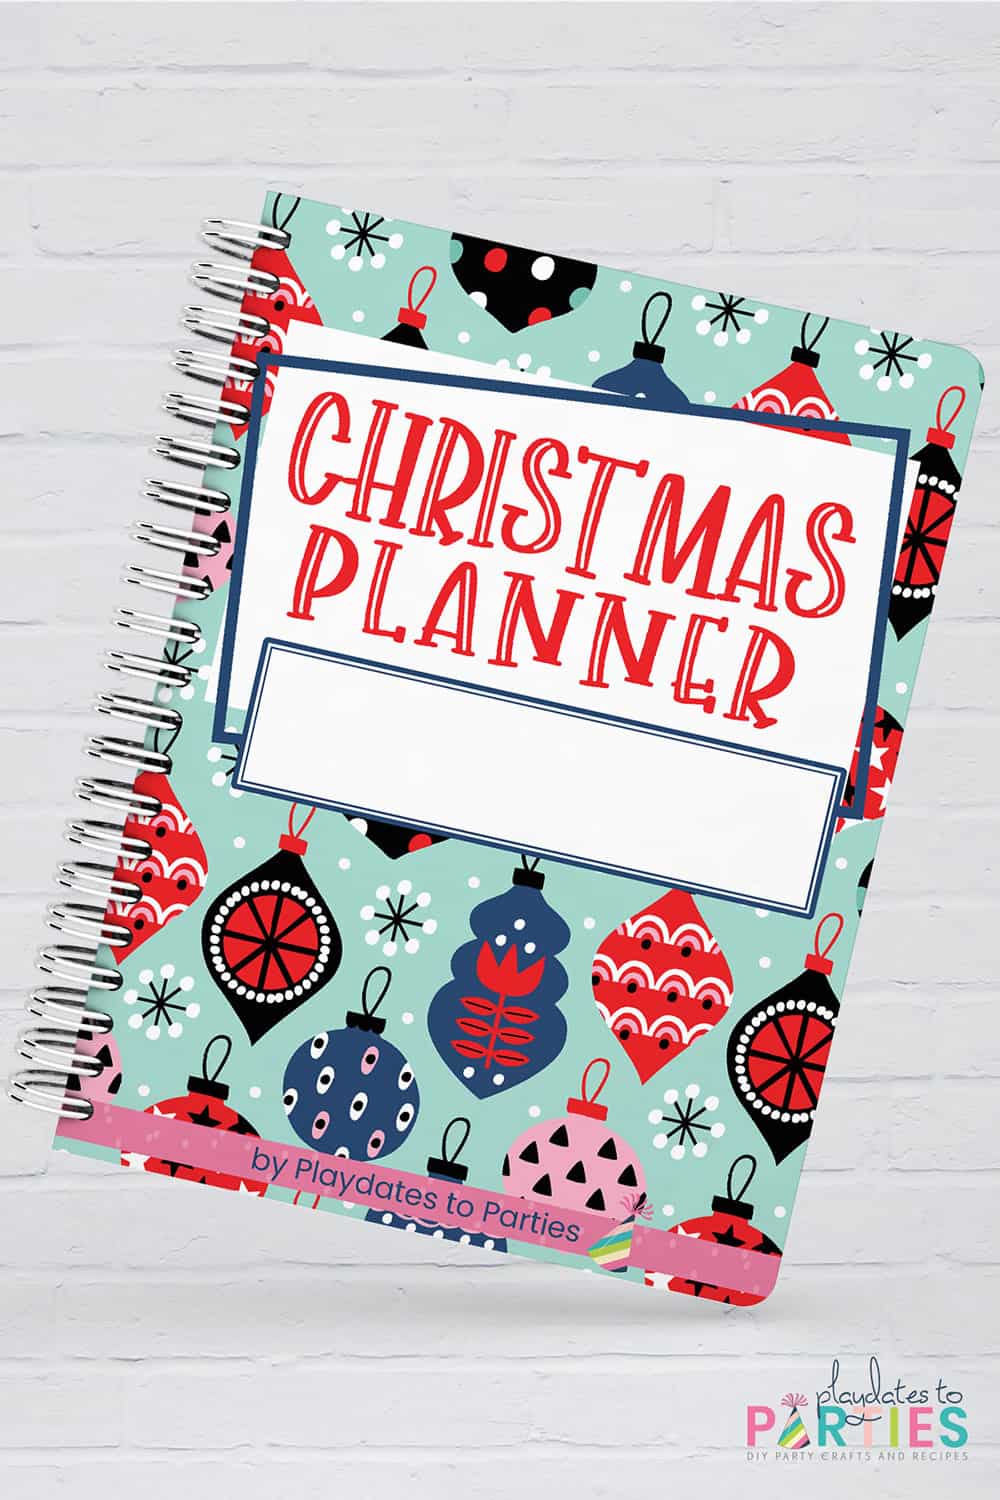 A bound copy of a Christmas planner against a white brick background.